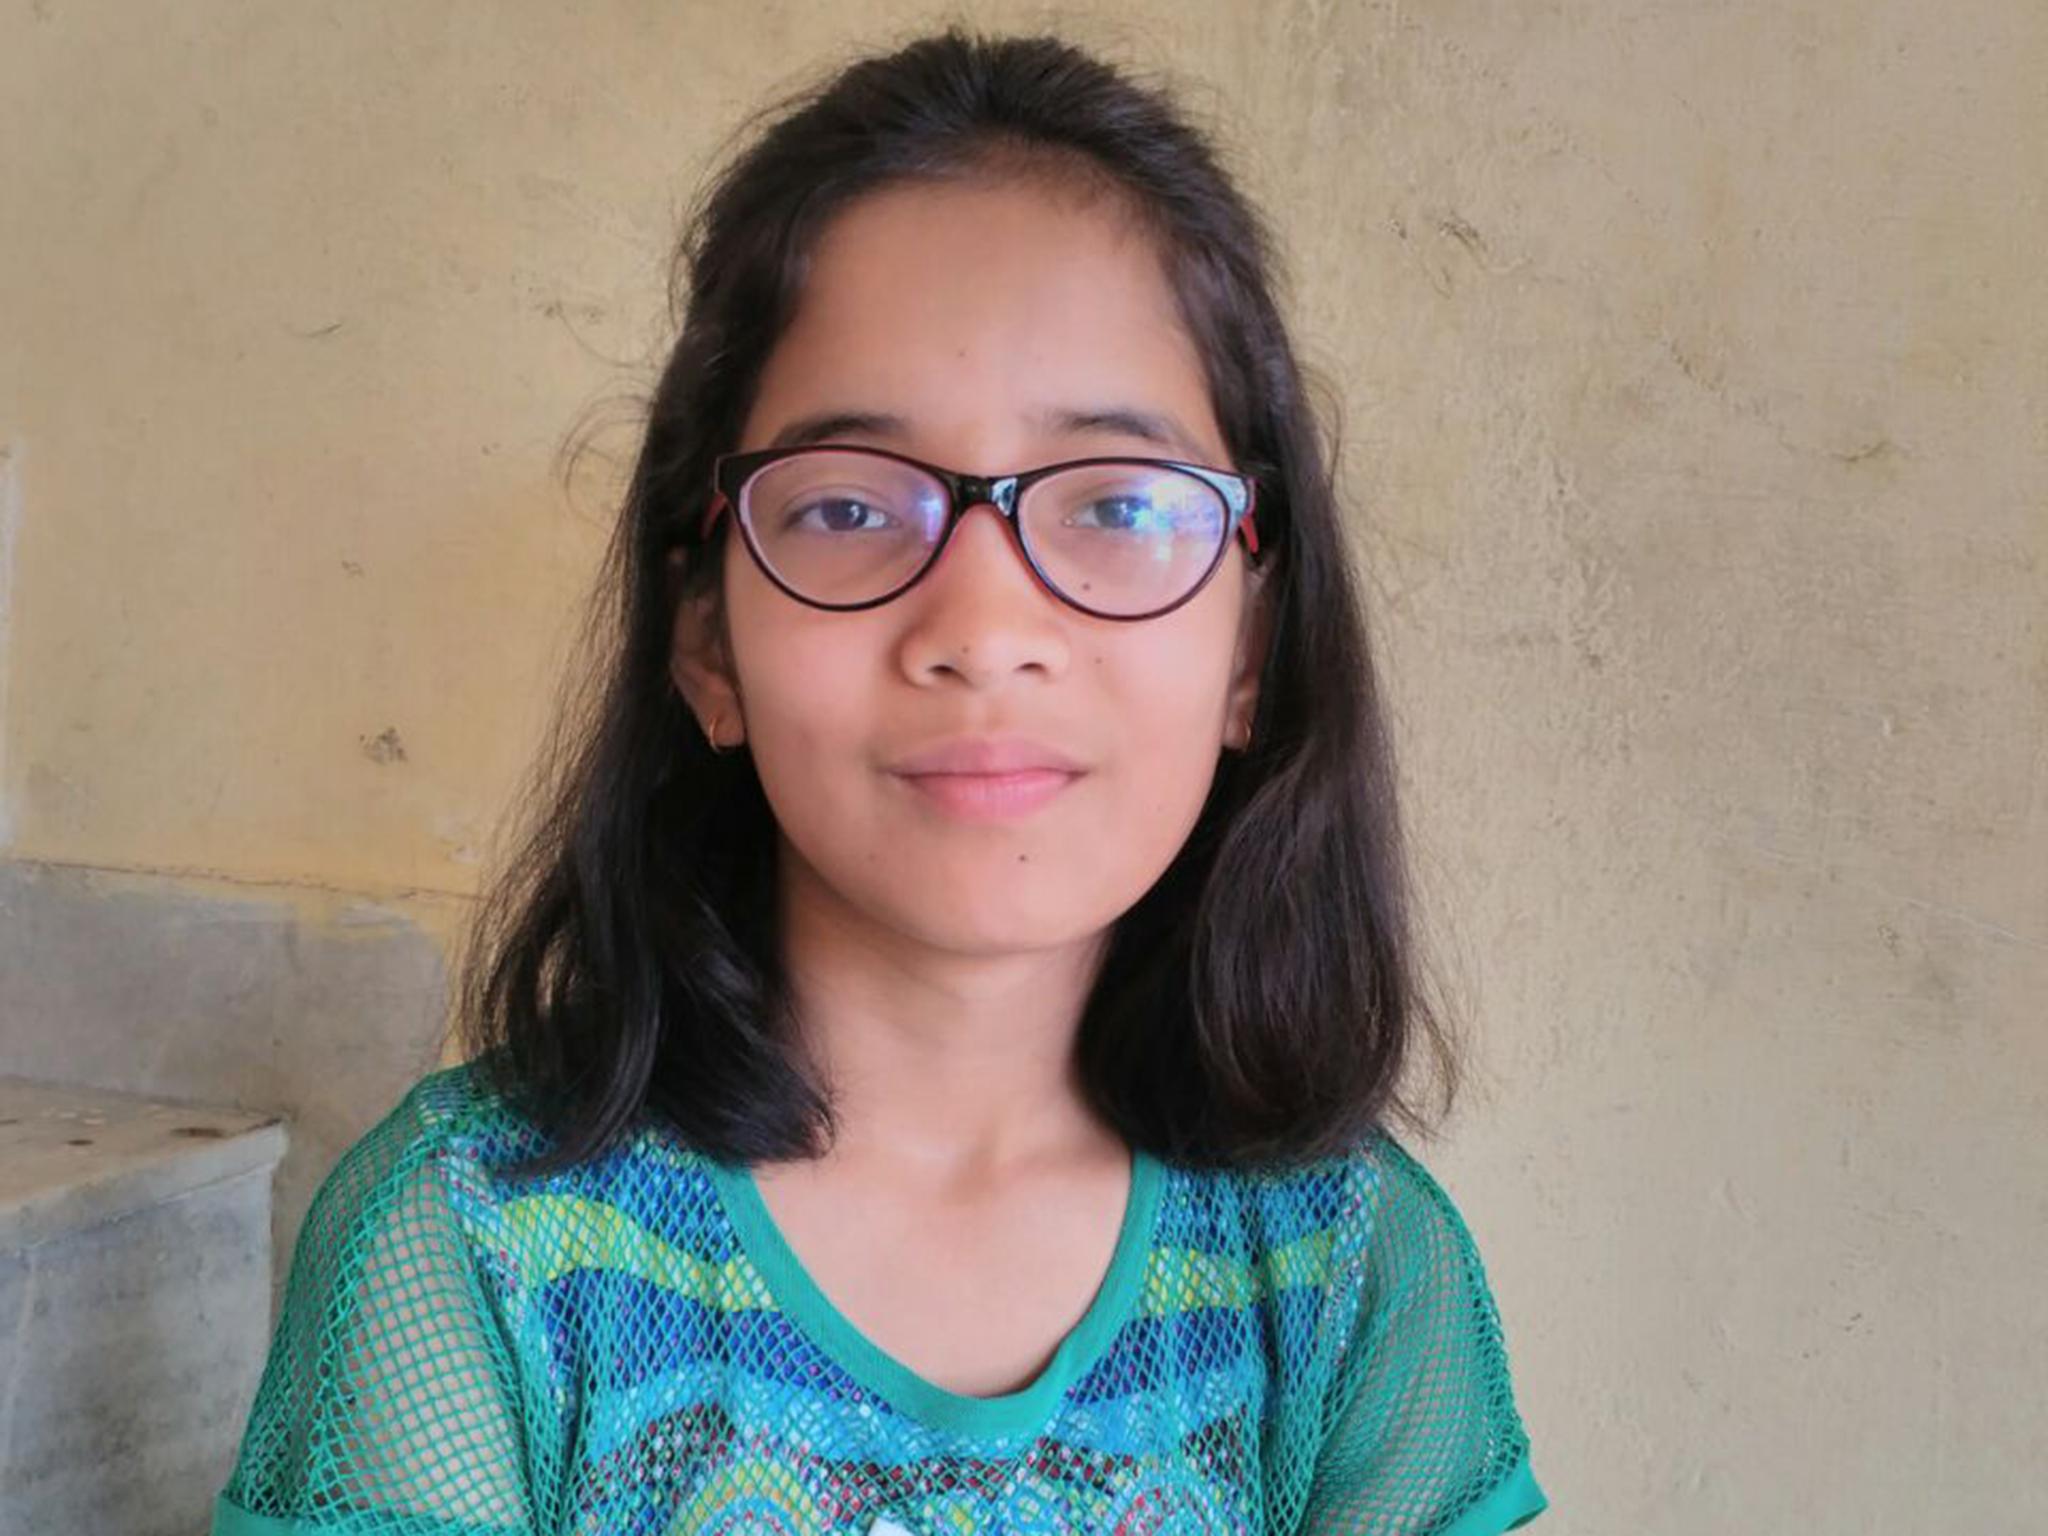 Ridhima Pandey filed a petition against the Indian government accusing it of  having failed to fulfill its duties to her and the Indian people to mitigate climate change